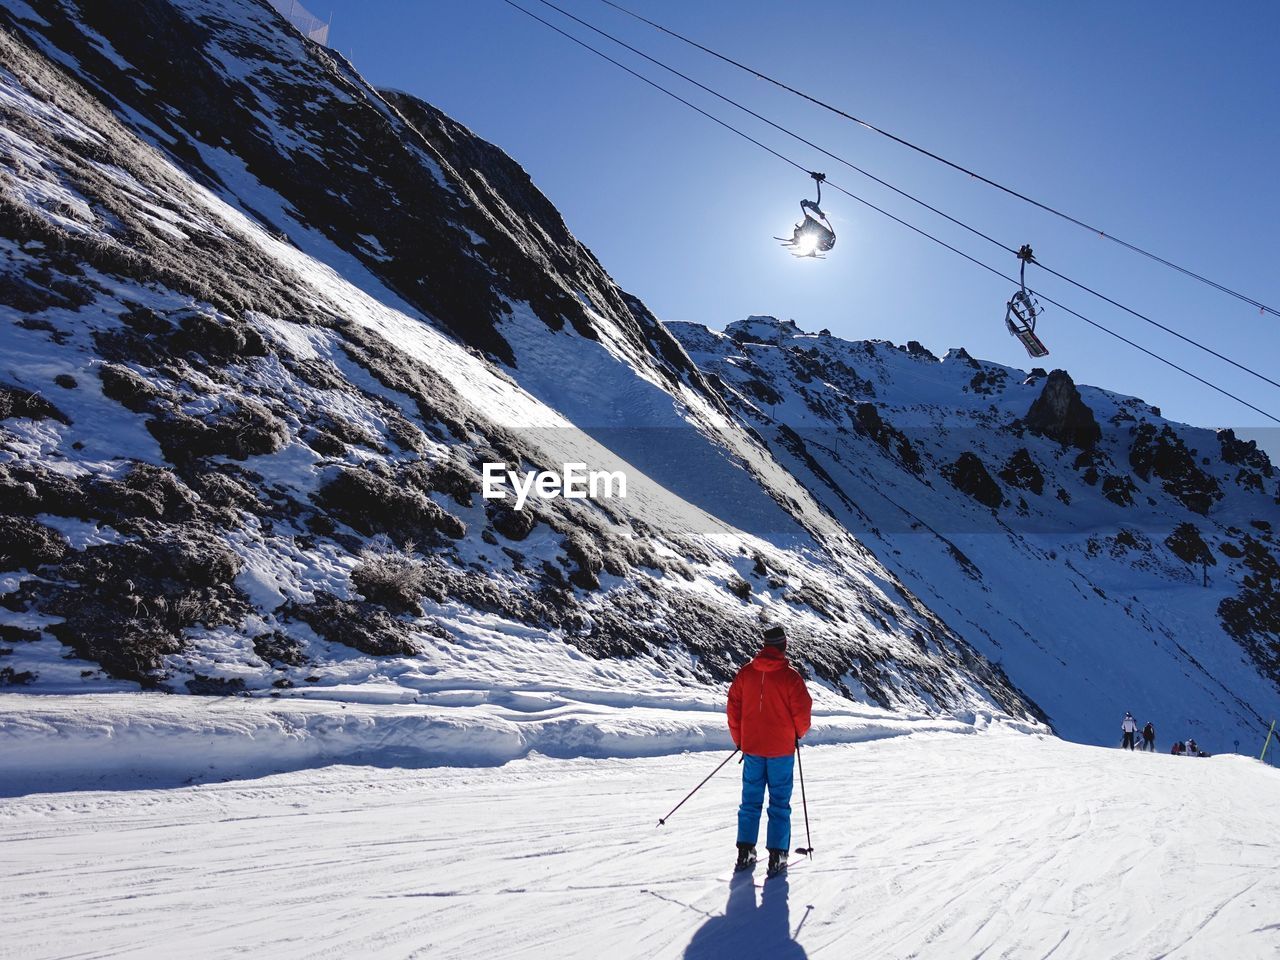 Rear view of skier on snow covered mountain